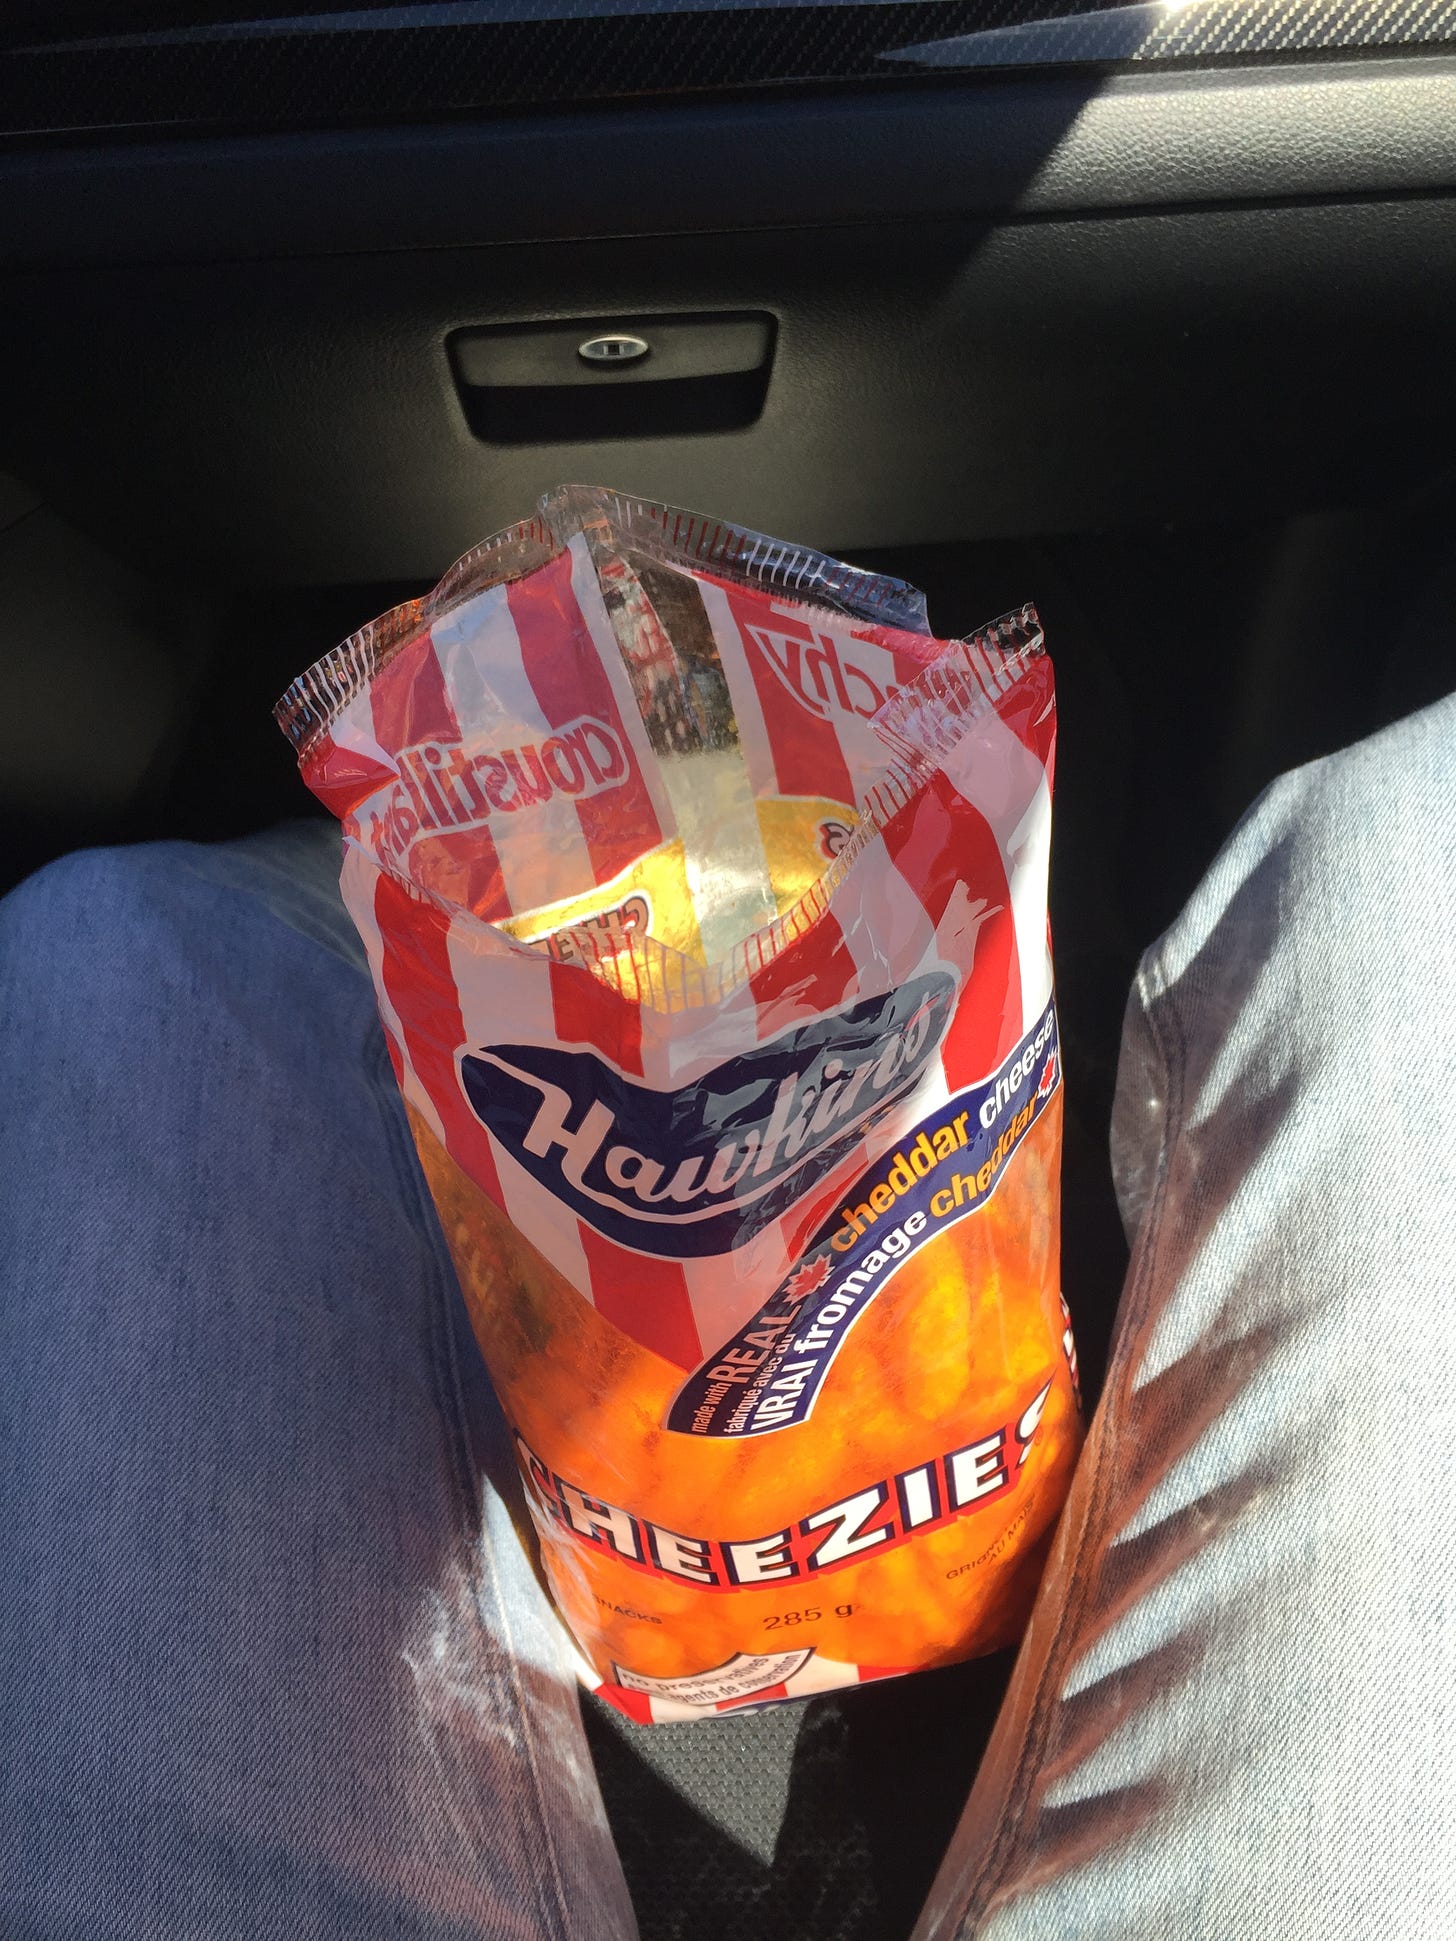 On my lap in the car, a red and white large bag of Hawkins cheezies, open at the top.